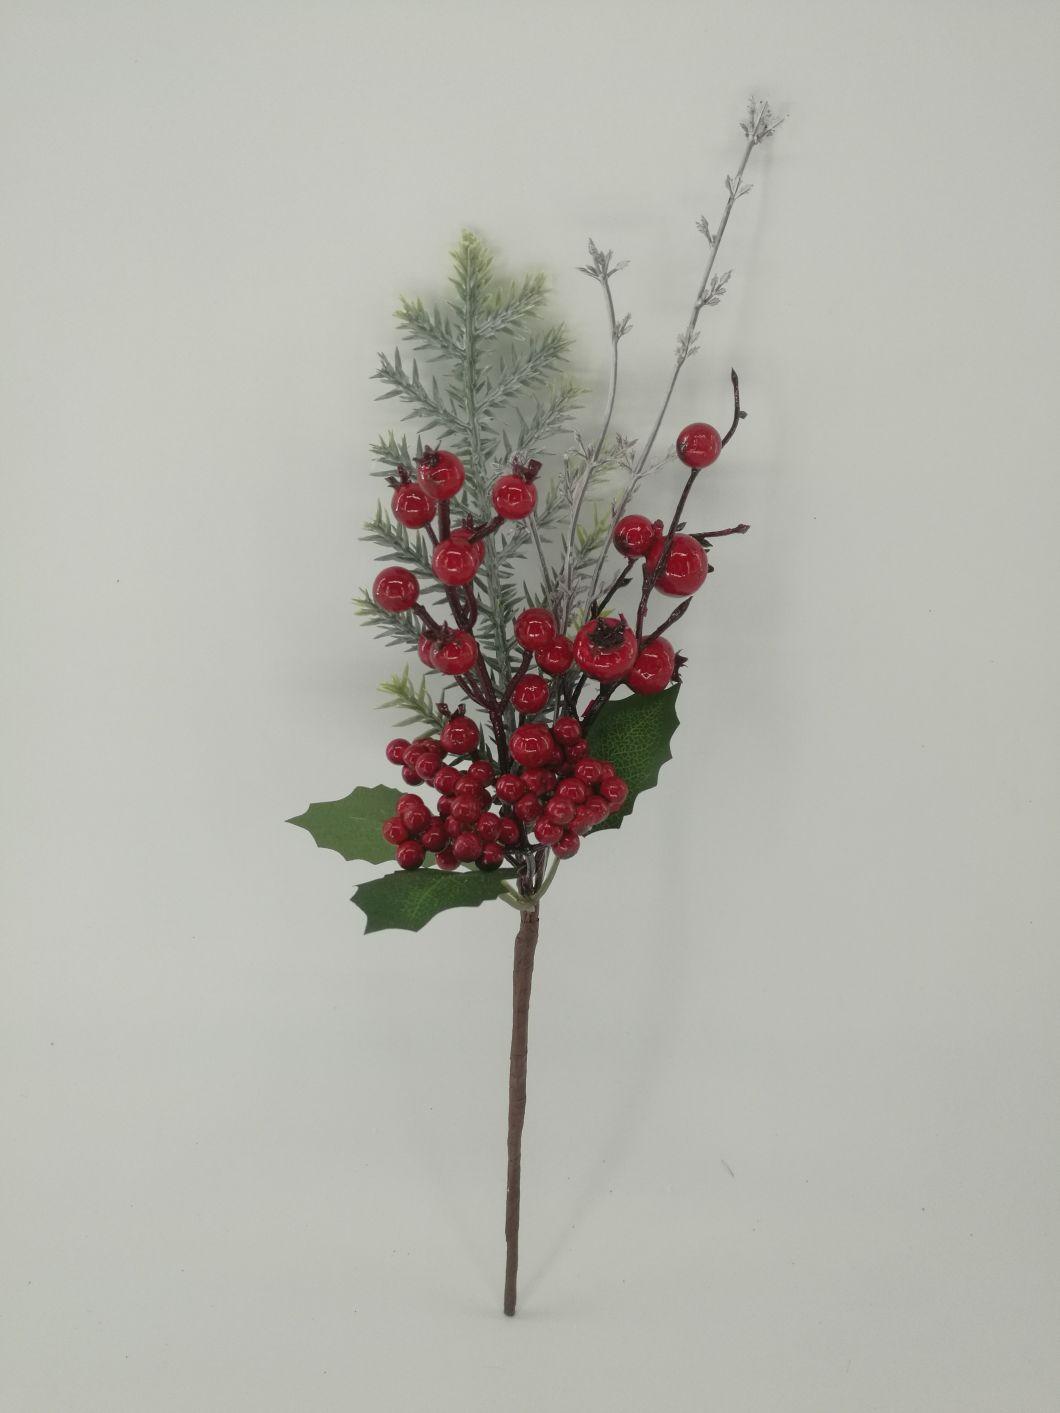 Artificial Red Berry Christmas Decorations Are Used for Family Wedding Decorations